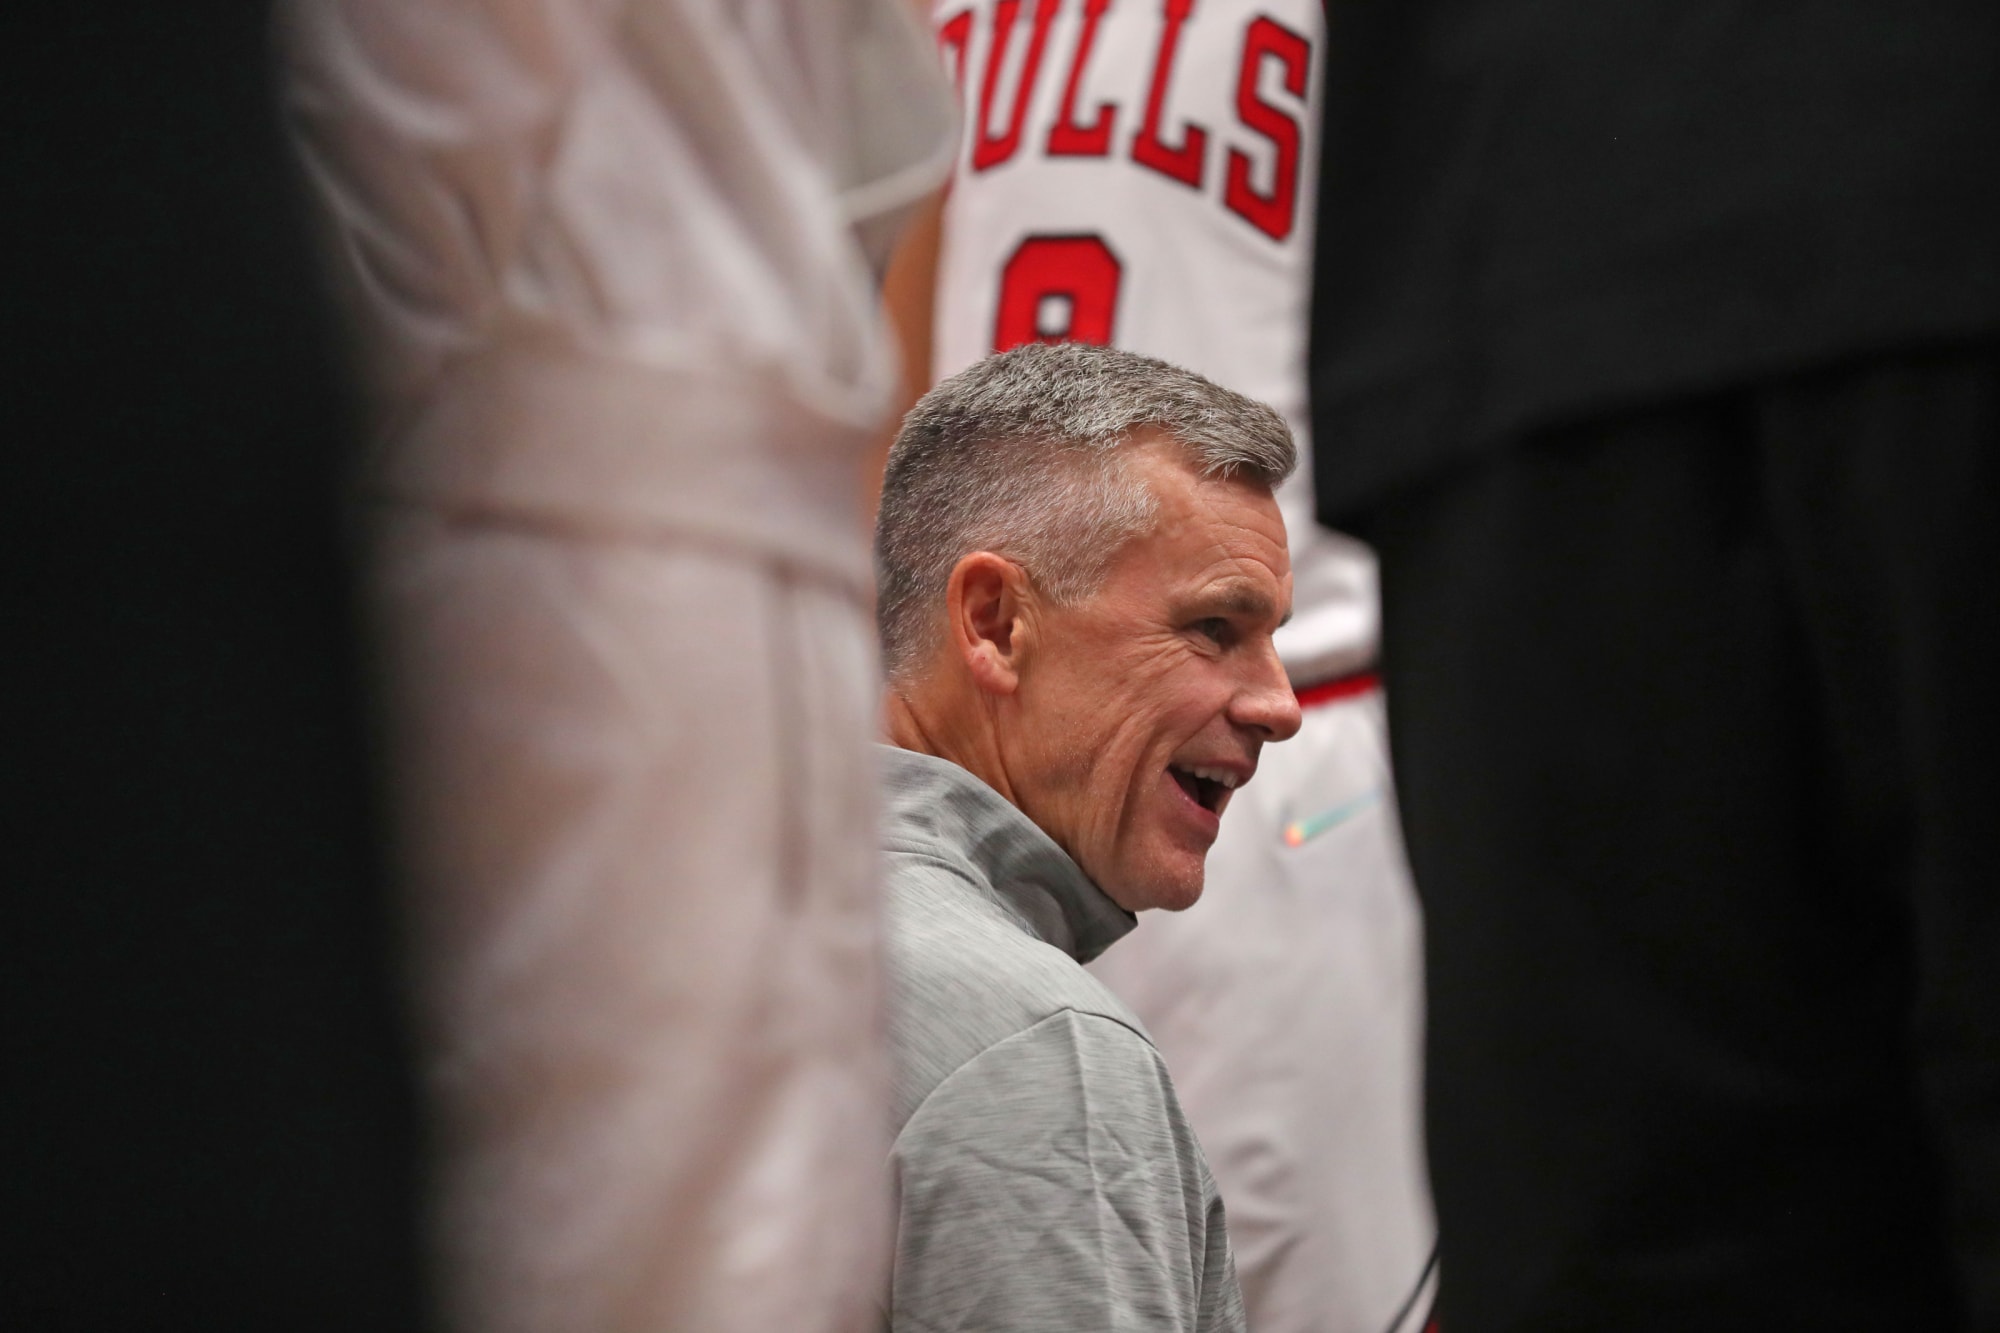 Chicago Bulls Depth shines in another blowout preseason victory